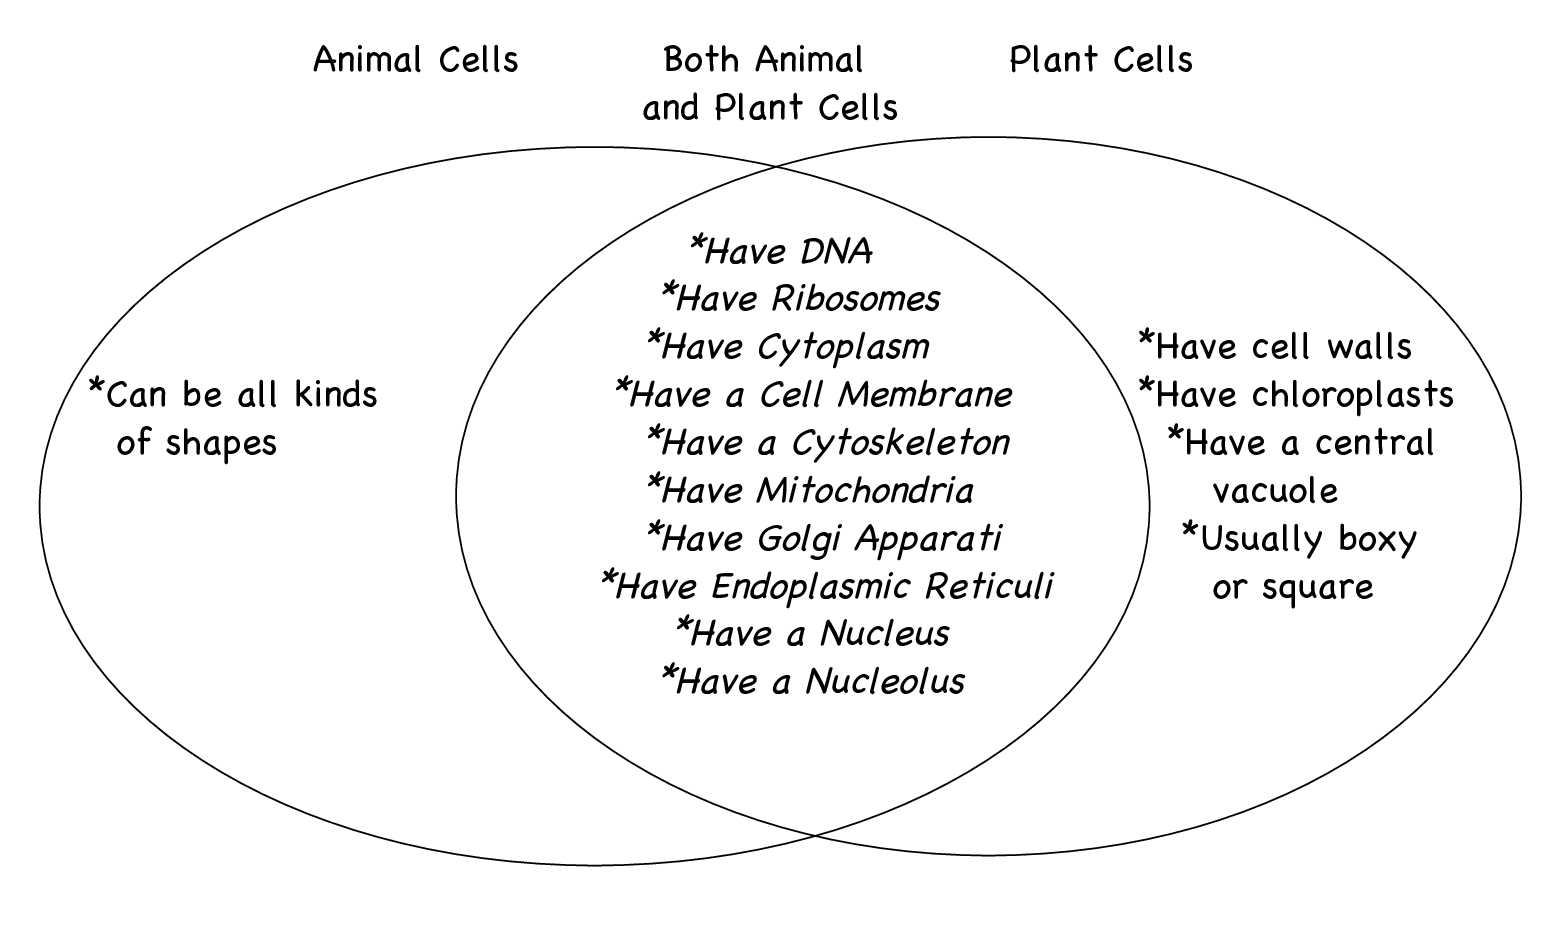 What are the differences between plants and animals?